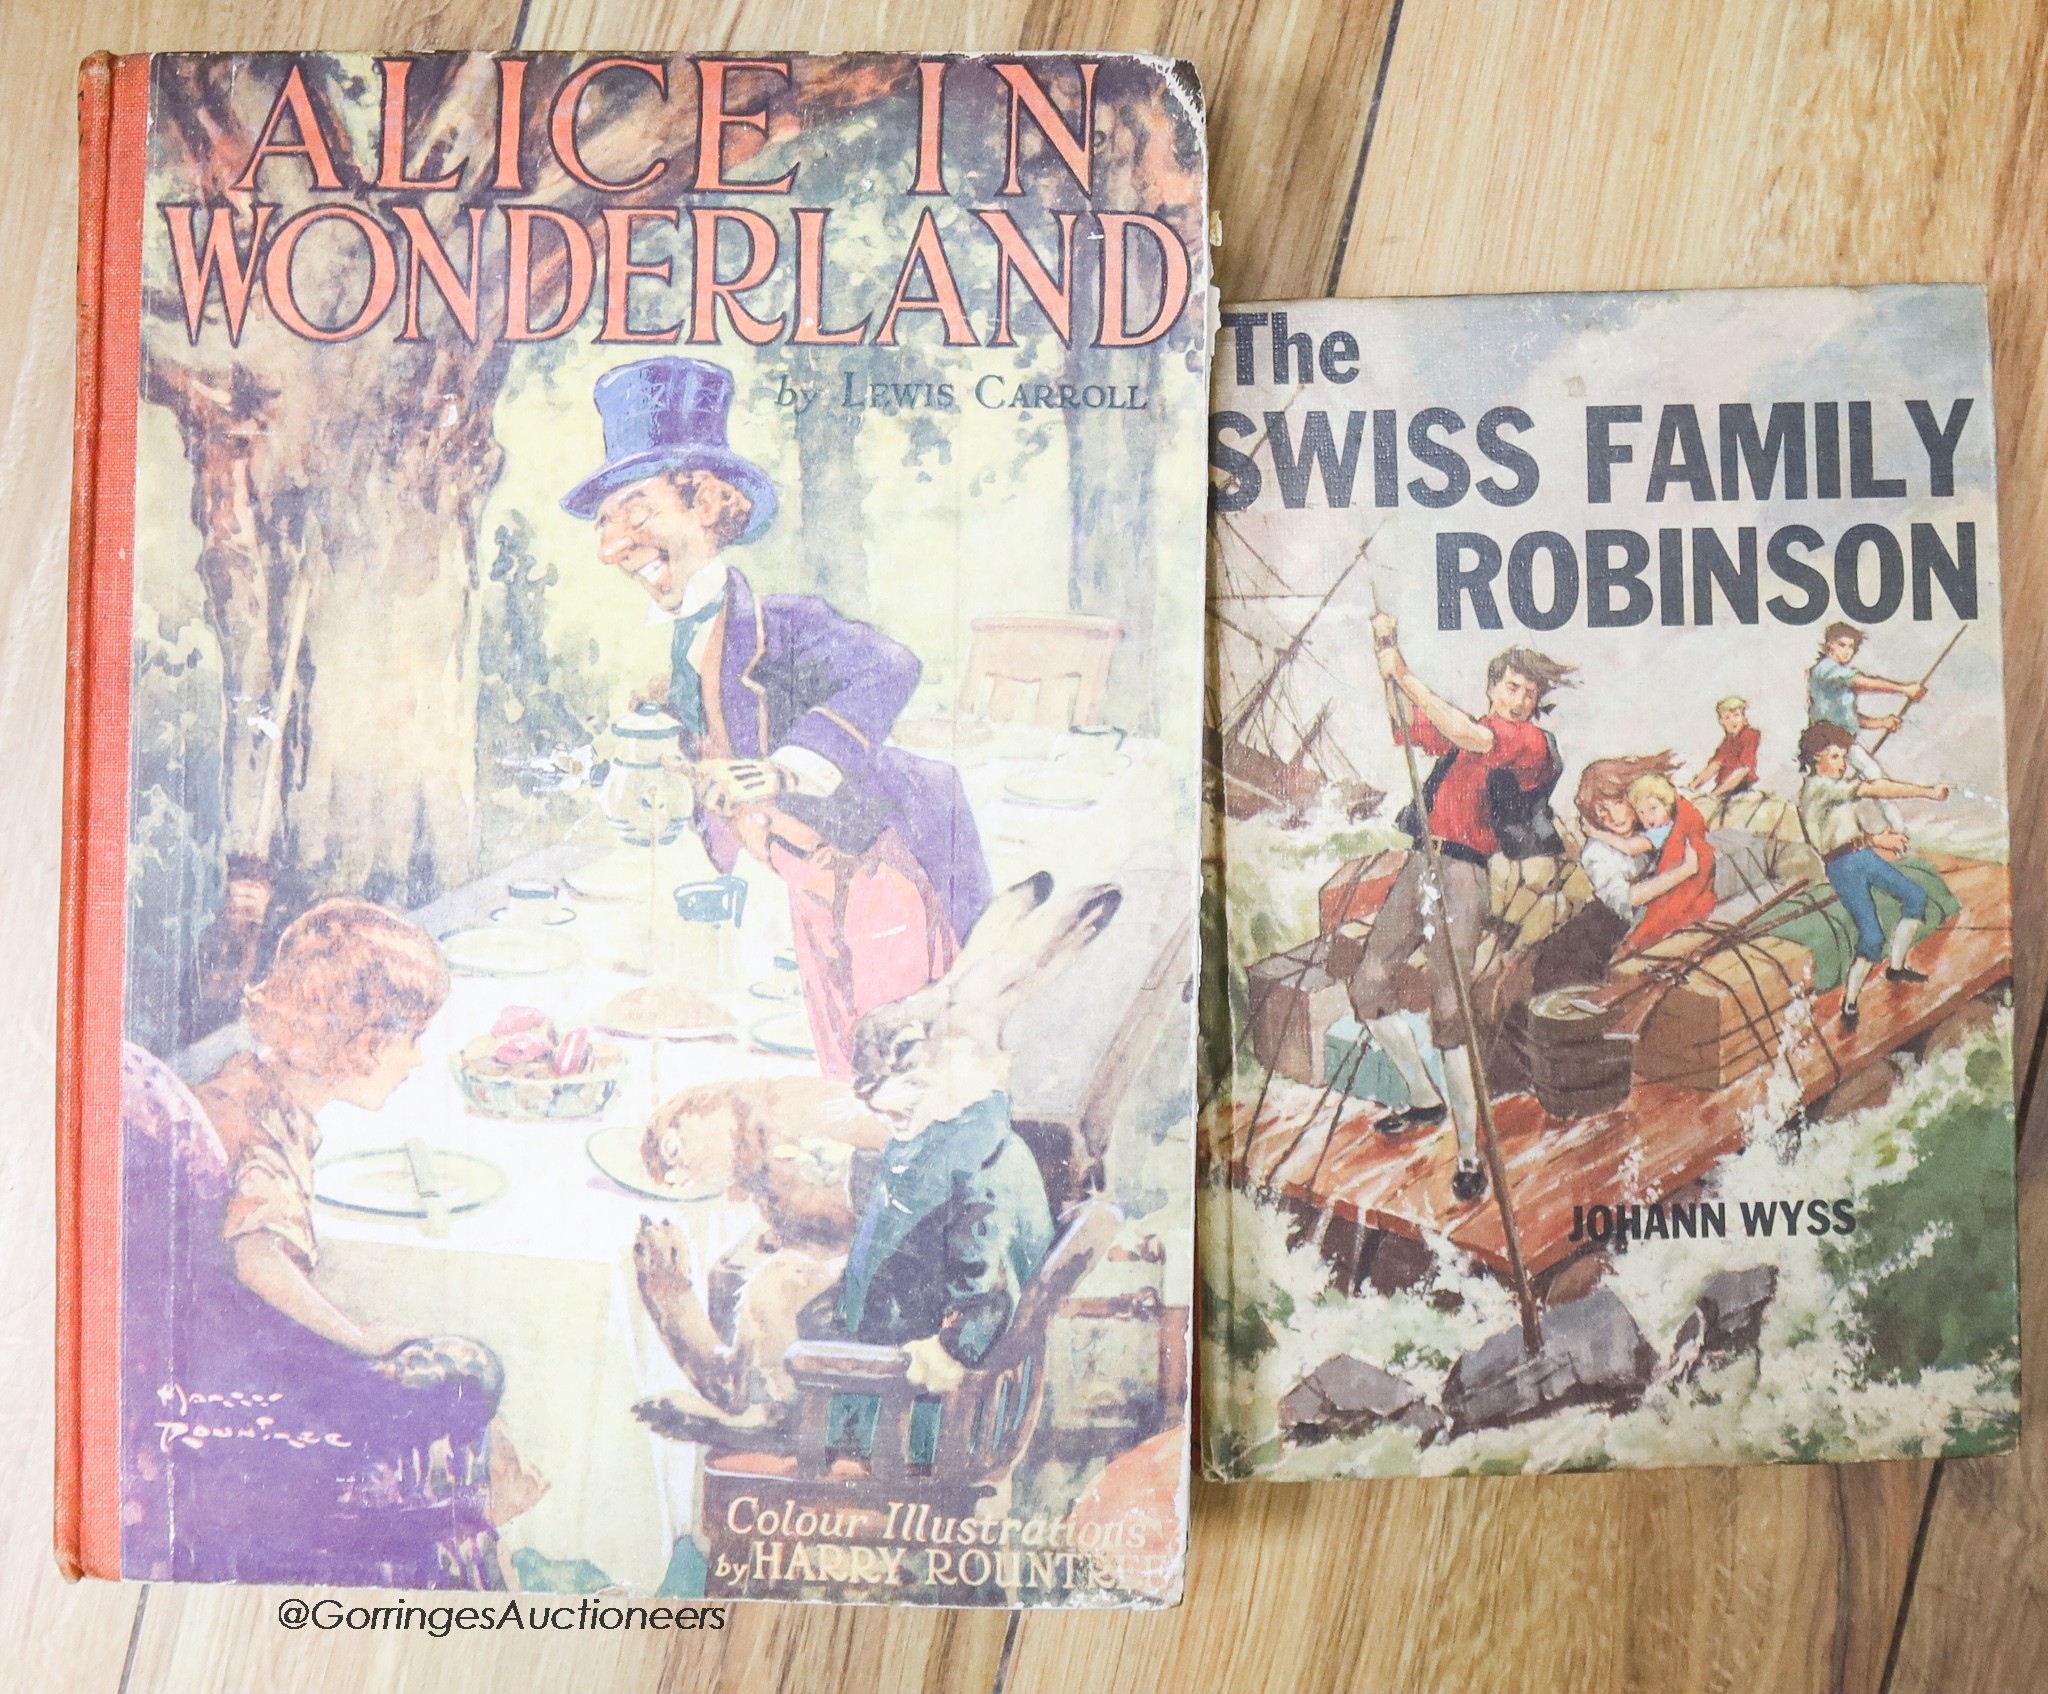 Lewis Carroll, Alice in Wonderland. Illustration by H. Rowntree, The Children's Press, 1936, and J Wyss, The Swiss Family Robinson